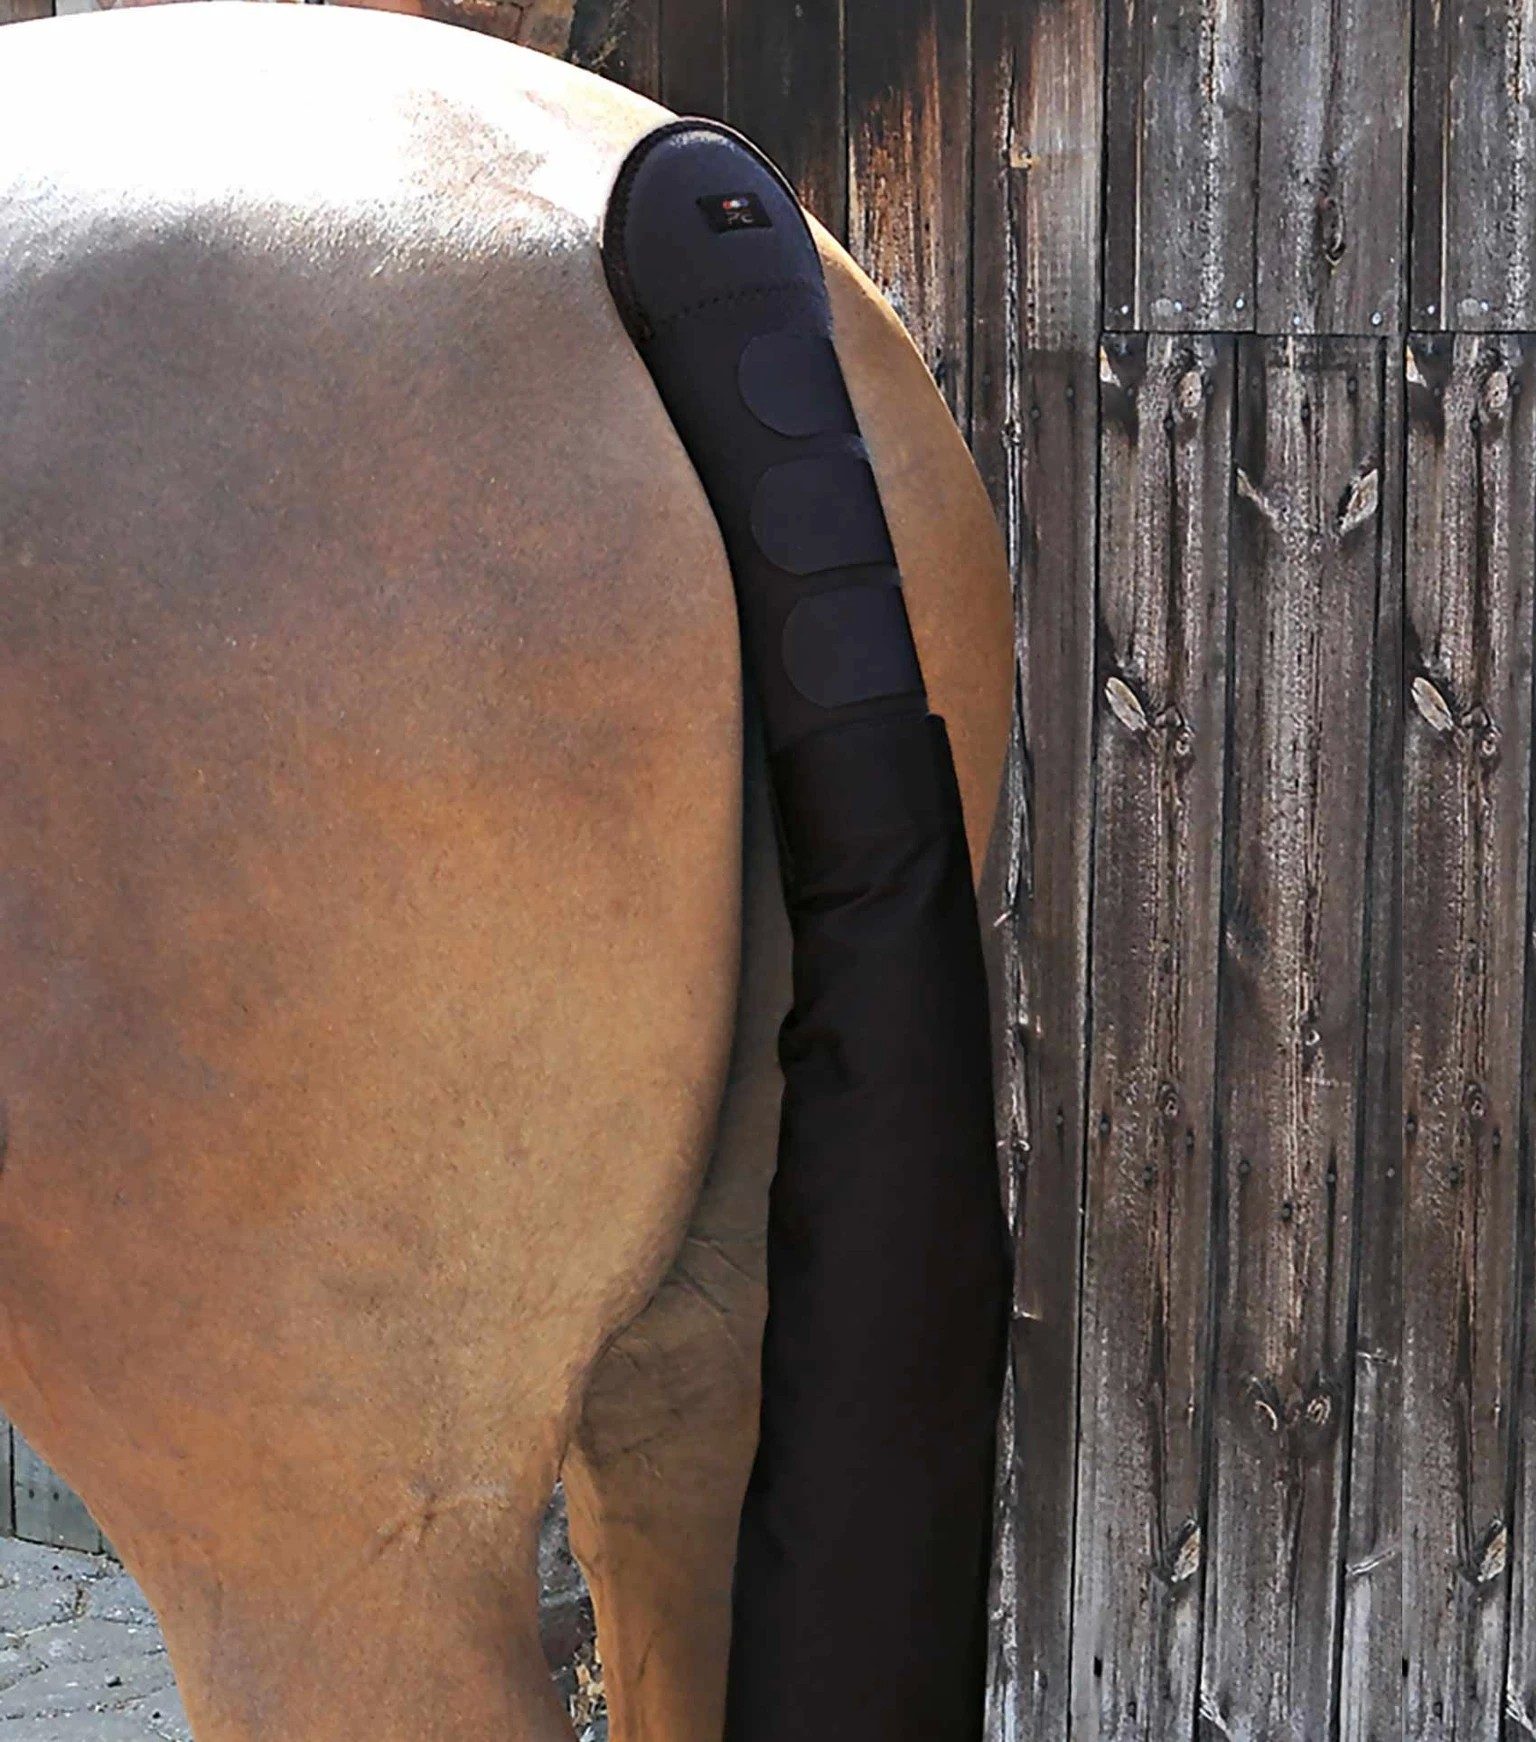 P.E PADDED HORSE TAIL GUARD WITH BAG